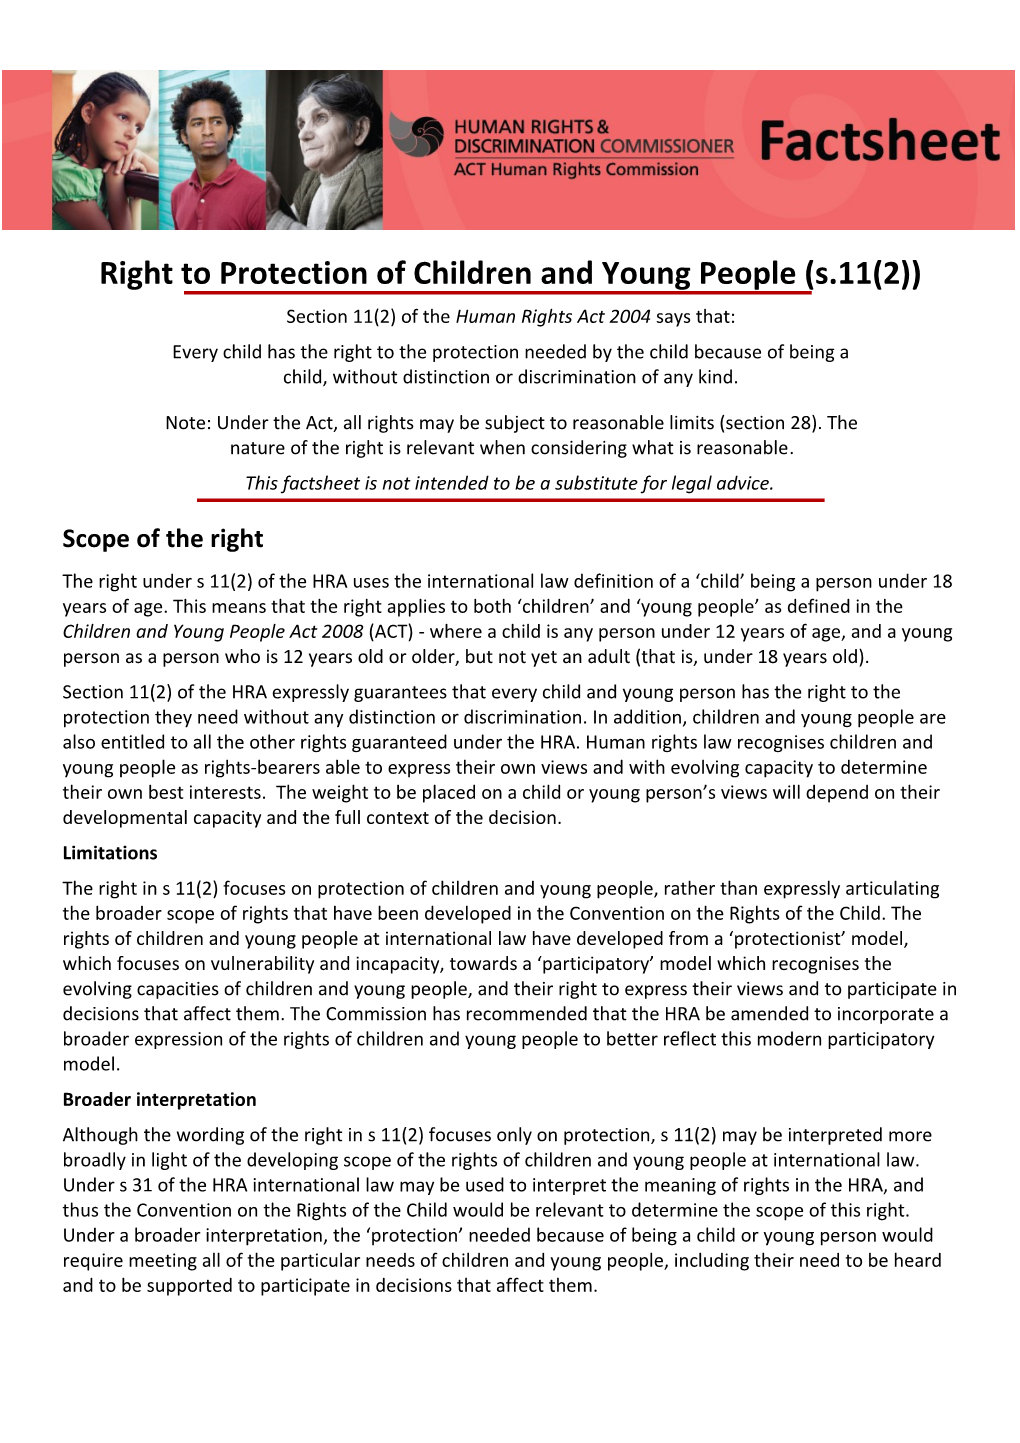 Rights of the Child